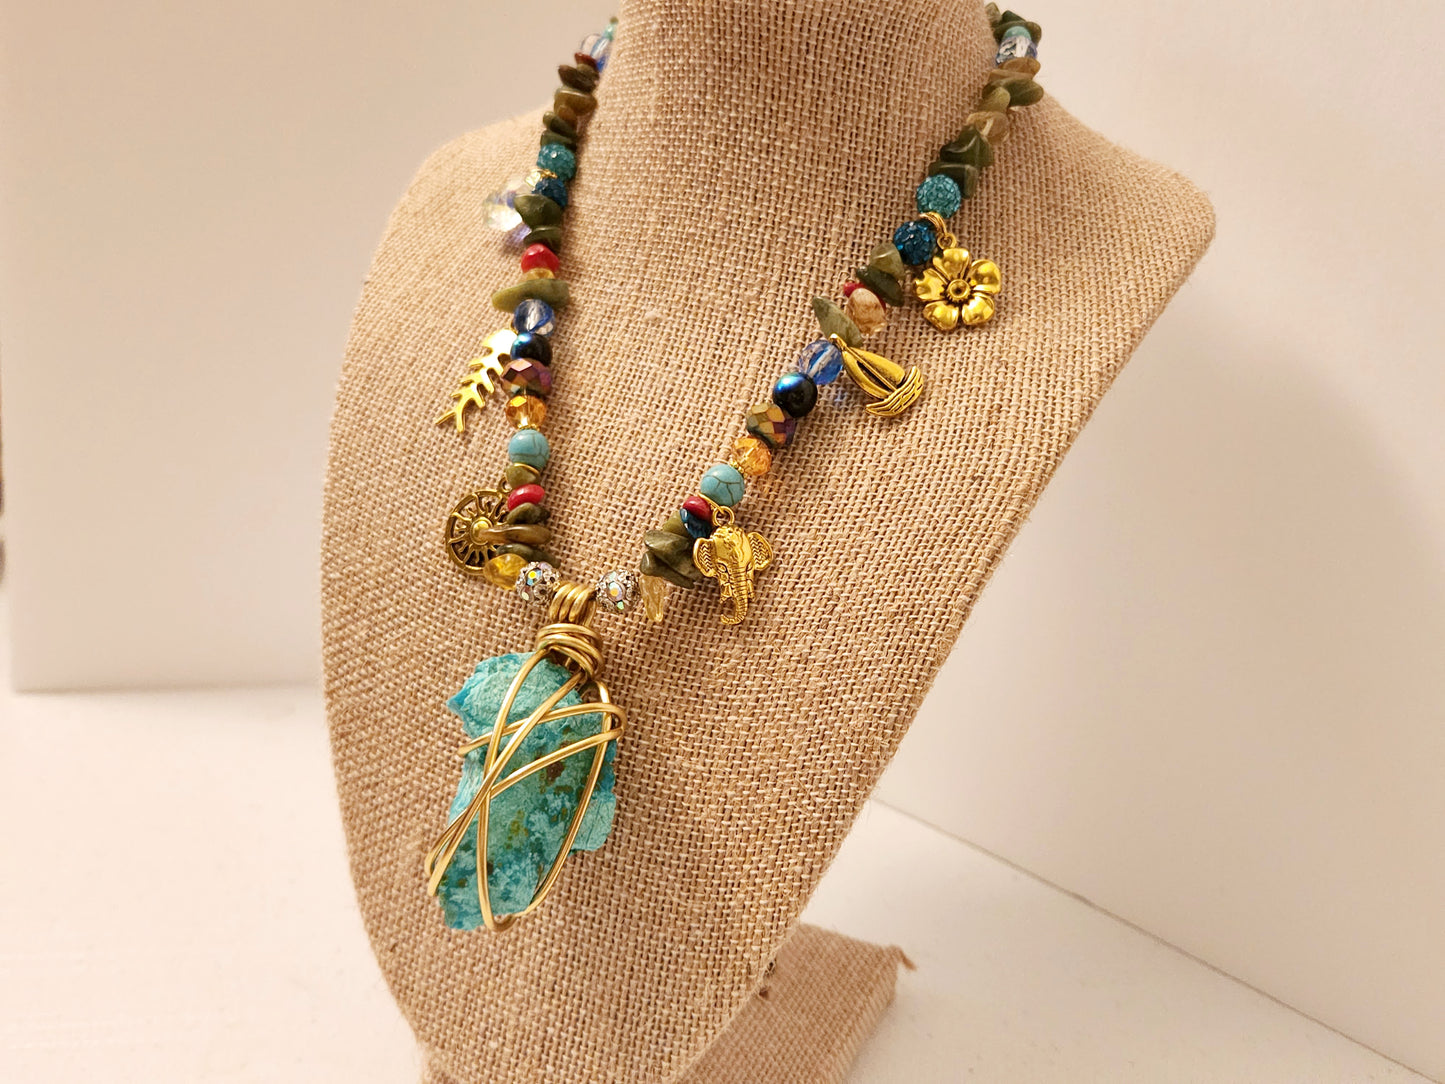 Chrysocolla Necklace with Charms, Wire Wrap Crystal Necklace